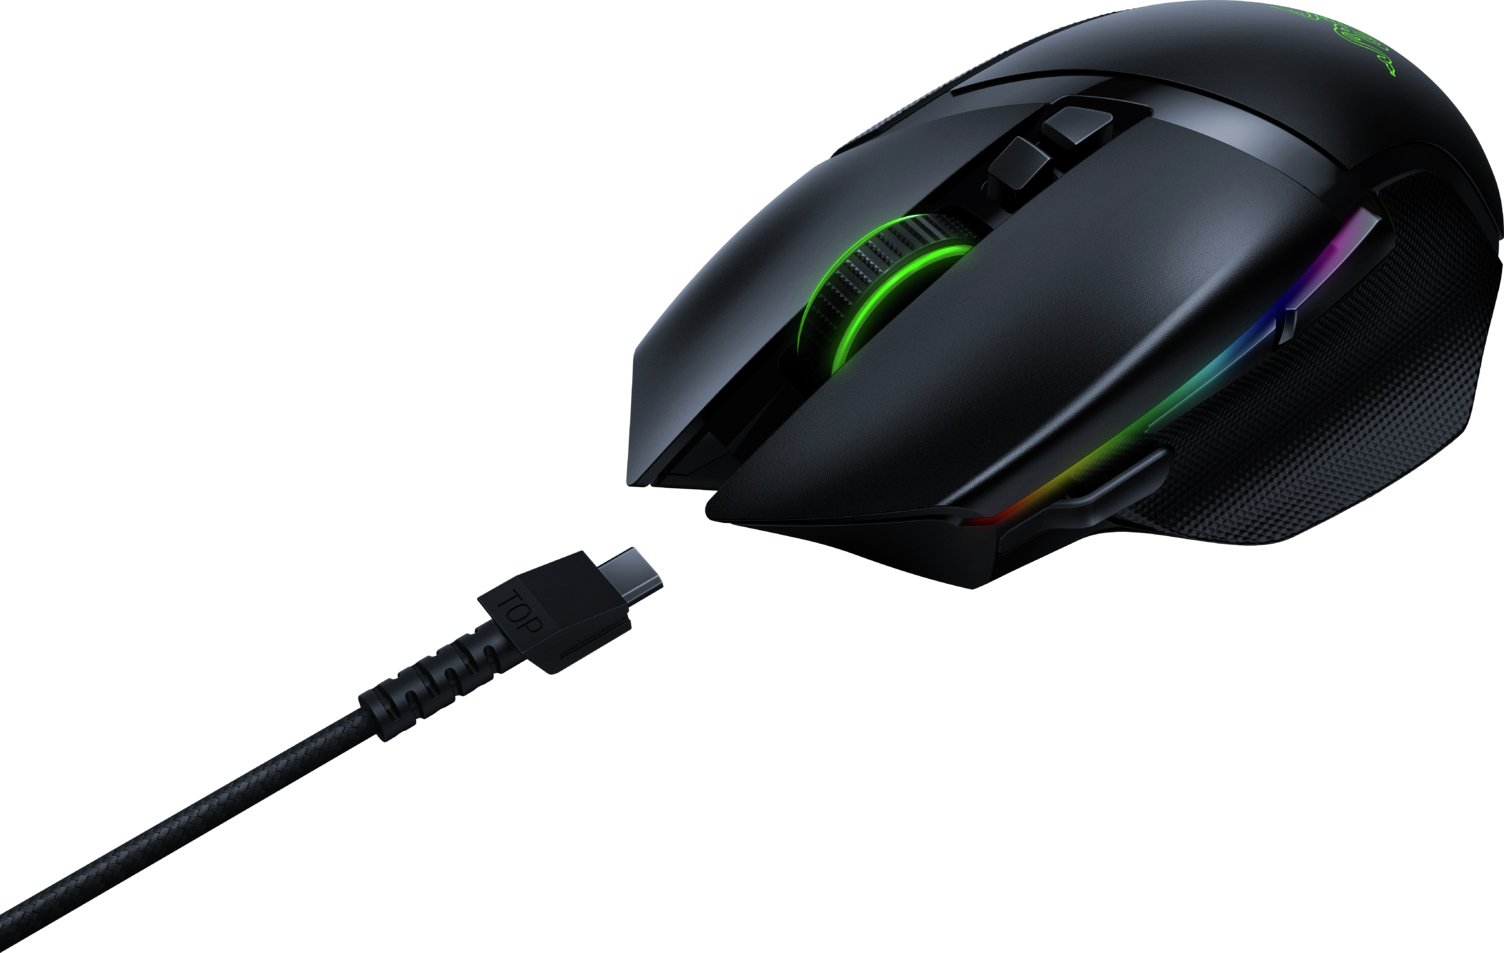 Razer Basilisk Ultimate Wireless Gaming Mouse Review